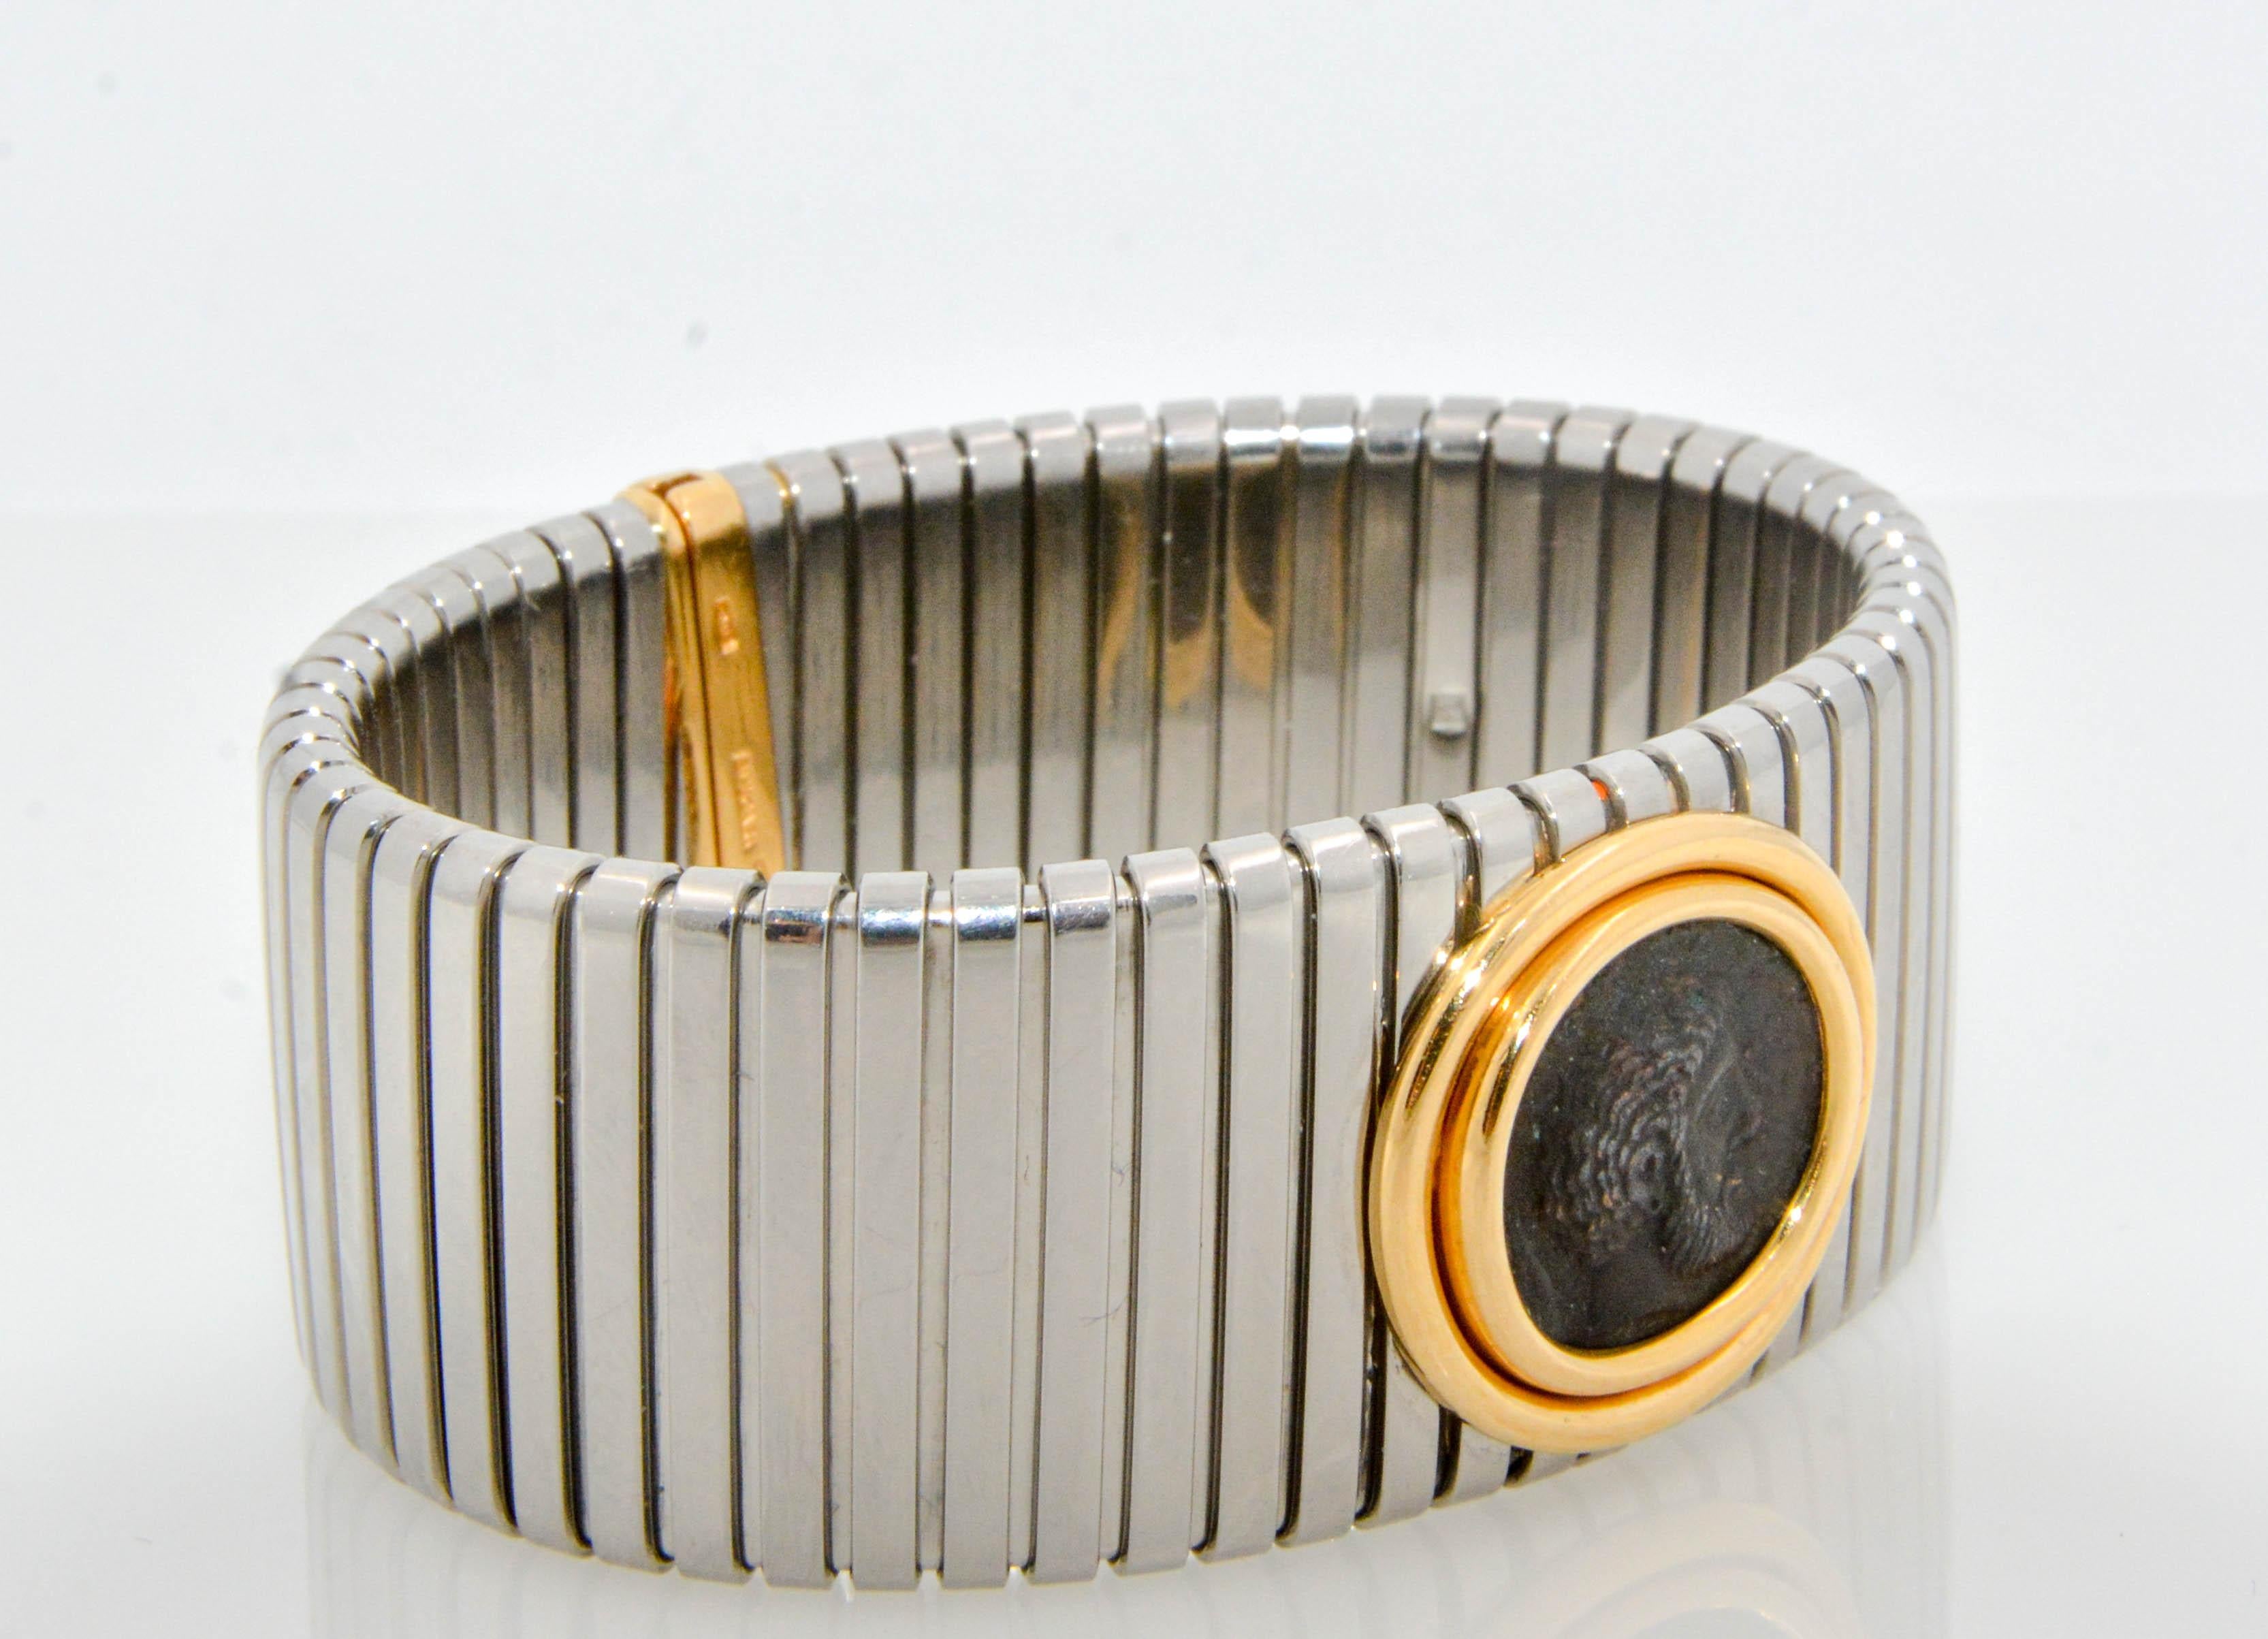 A special & traditional piece from the iconic Monete Collection from Bulgari; an 18K yellow gold/stainless steel tubogas bracelet set with a 4th century Sicilian ancient coin in a bezel center. 

Nicola Bulgari was an enthusiastic coin collector who